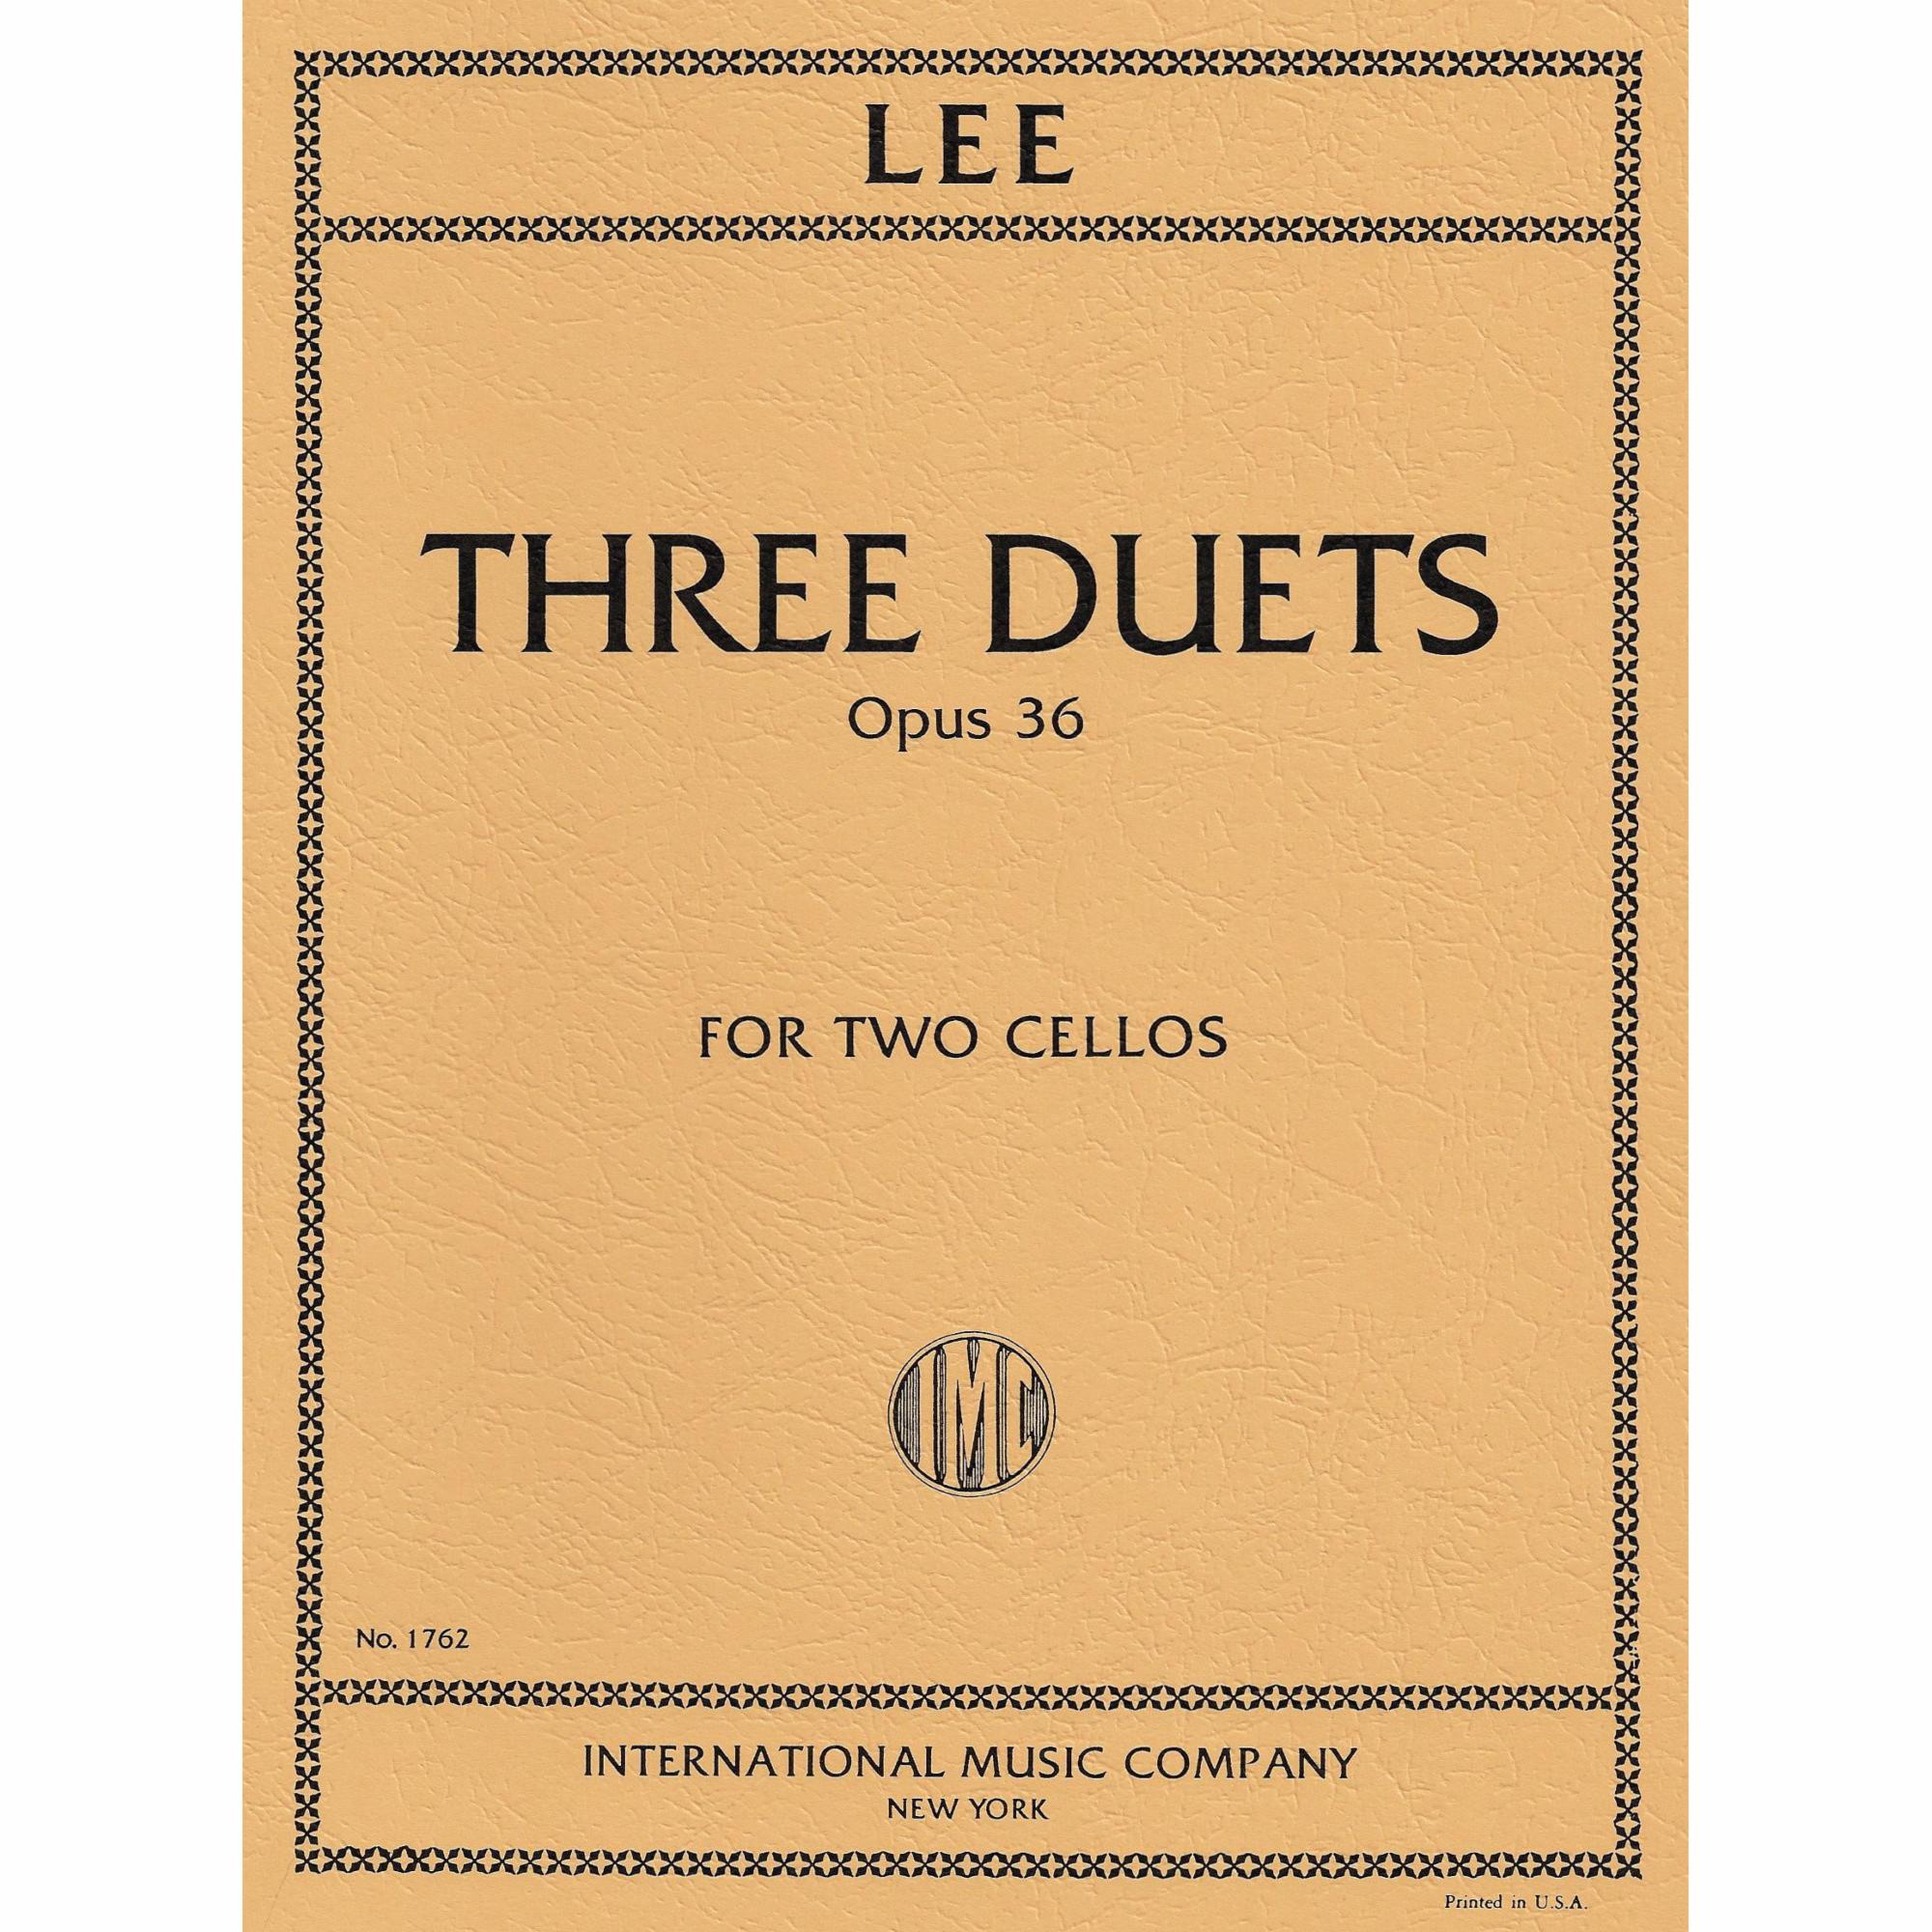 Lee -- Three Duets, Op. 36 for Two Cellos